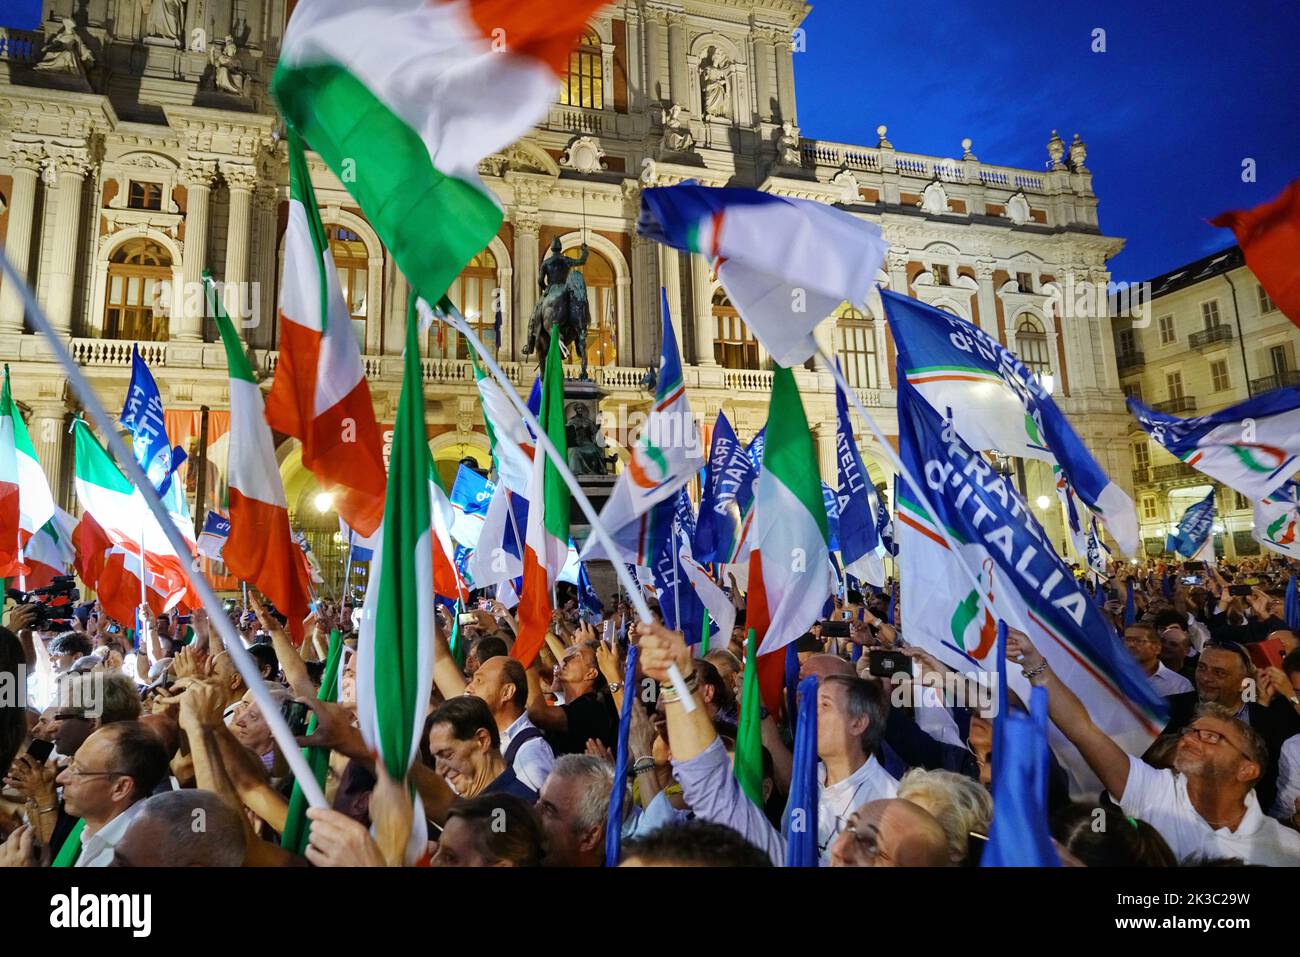 Fratelli d'Italia party militants during an election rally in 2022. Turin, Italy - September 2022 Stock Photo